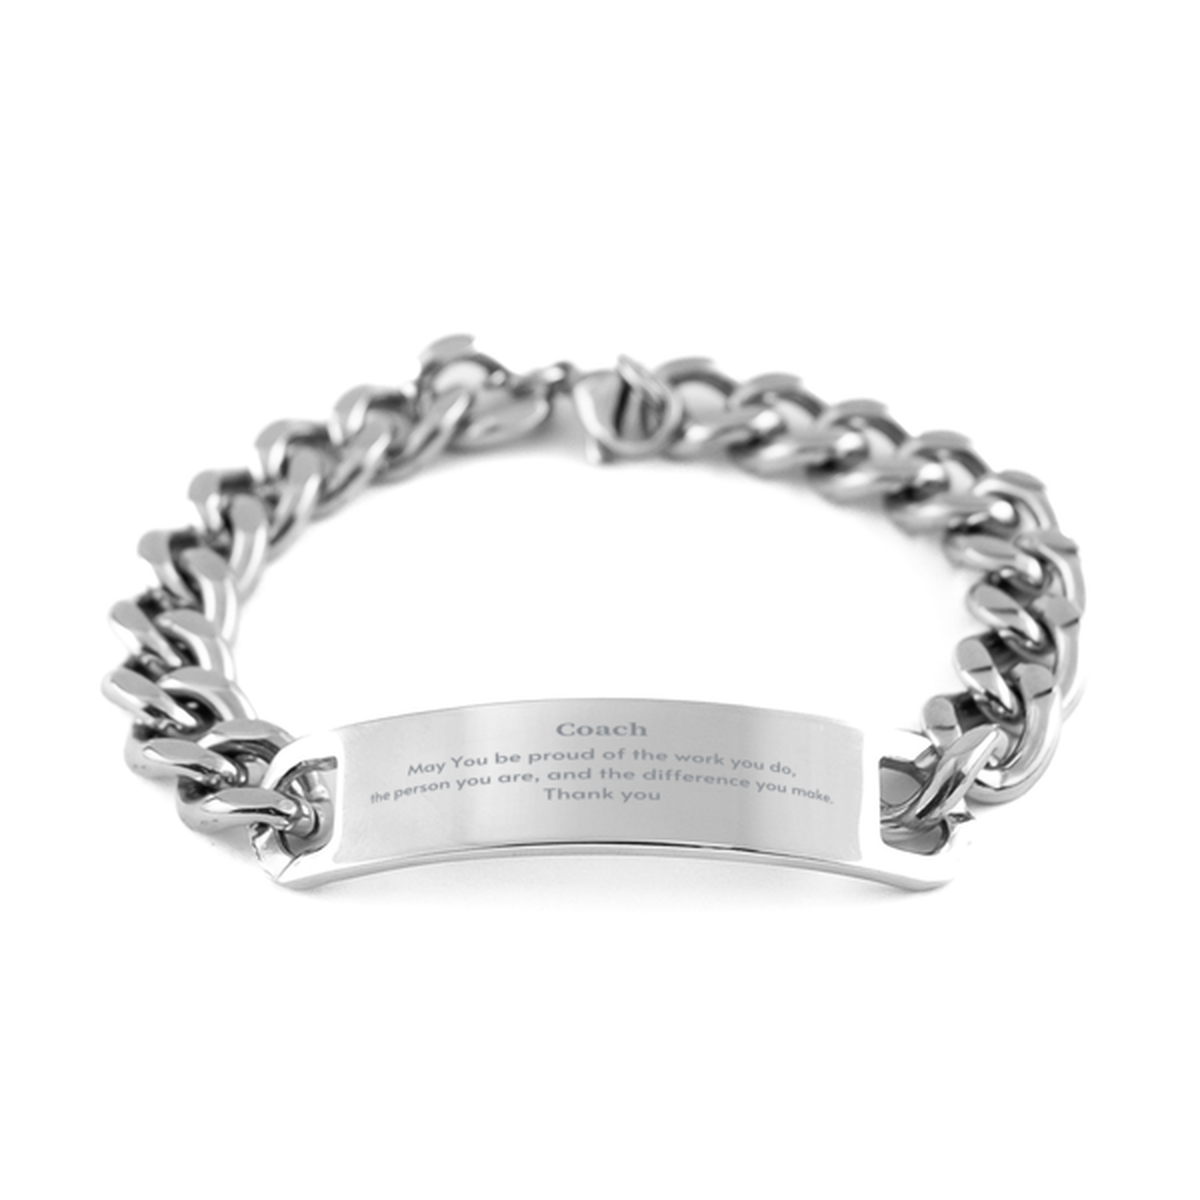 Heartwarming Cuban Chain Stainless Steel Bracelet Retirement Coworkers Gifts for Coach, Coach May You be proud of the work you do, the person you are Gifts for Boss Men Women Friends